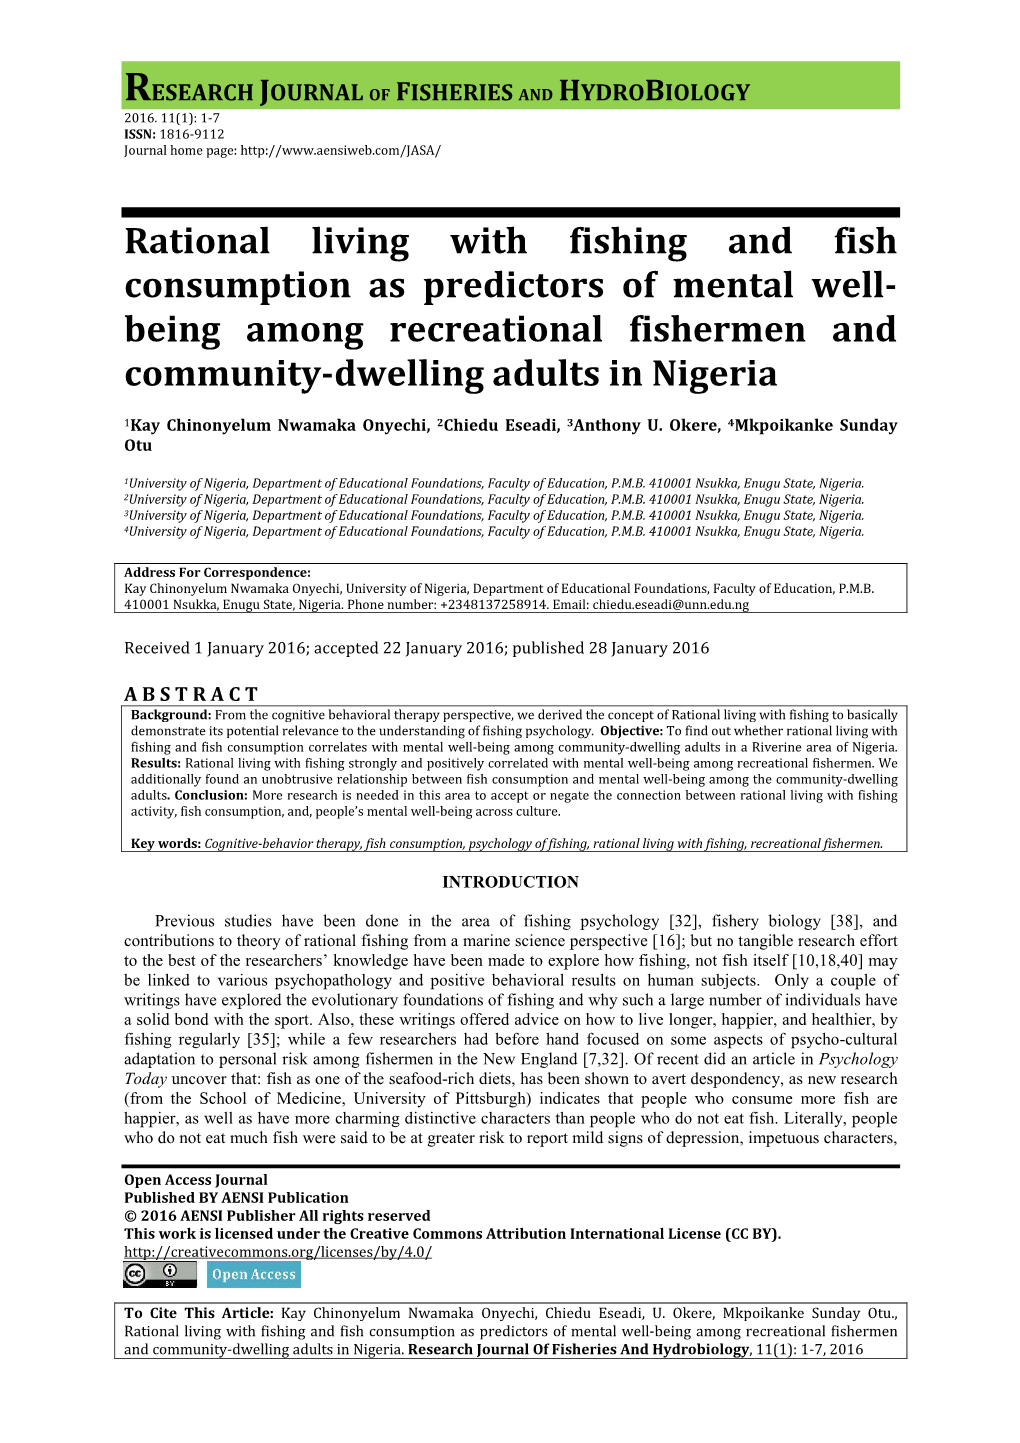 Being Among Recreational Fishermen and Community-Dwelling Adults in Nigeria